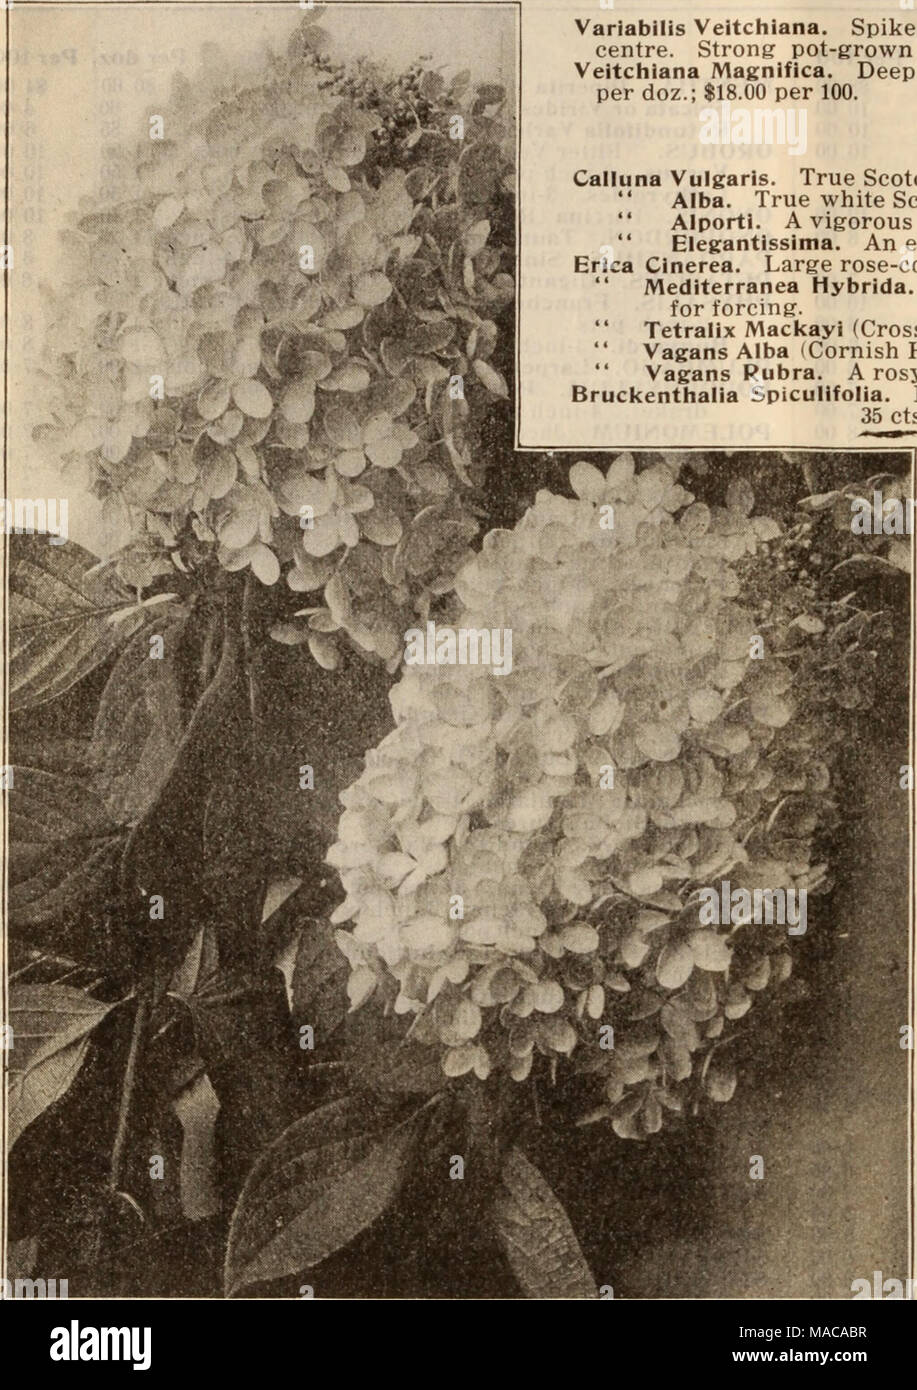 . Dreer's wholesale price list / Henry A. Dreer. . 4®=&quot; NOTE All prices include boxes, packing and delivery to any Express, Freight or Steamboat Line in Philadelphia. &quot;=6* New Buddleyas. Variabilis Veitchiana. Spikes of flowers 18 to 20 inches long of violet-mauve with yellow centre. Strong pot-grown plants, 20 cts. each; $2.00 per doz.; $15.00 per 100. Veitchiana Magnifica. Deep rose purple with orange-yellow centre. 25 cts. each; $2.50 per doz.; $18.00 per 100. h Callunas and Ericas. (Hardy Heather and Heath.) Calluna Vulgaris. True Scotch heather. Alba. True white Scotch heather.  Stock Photo